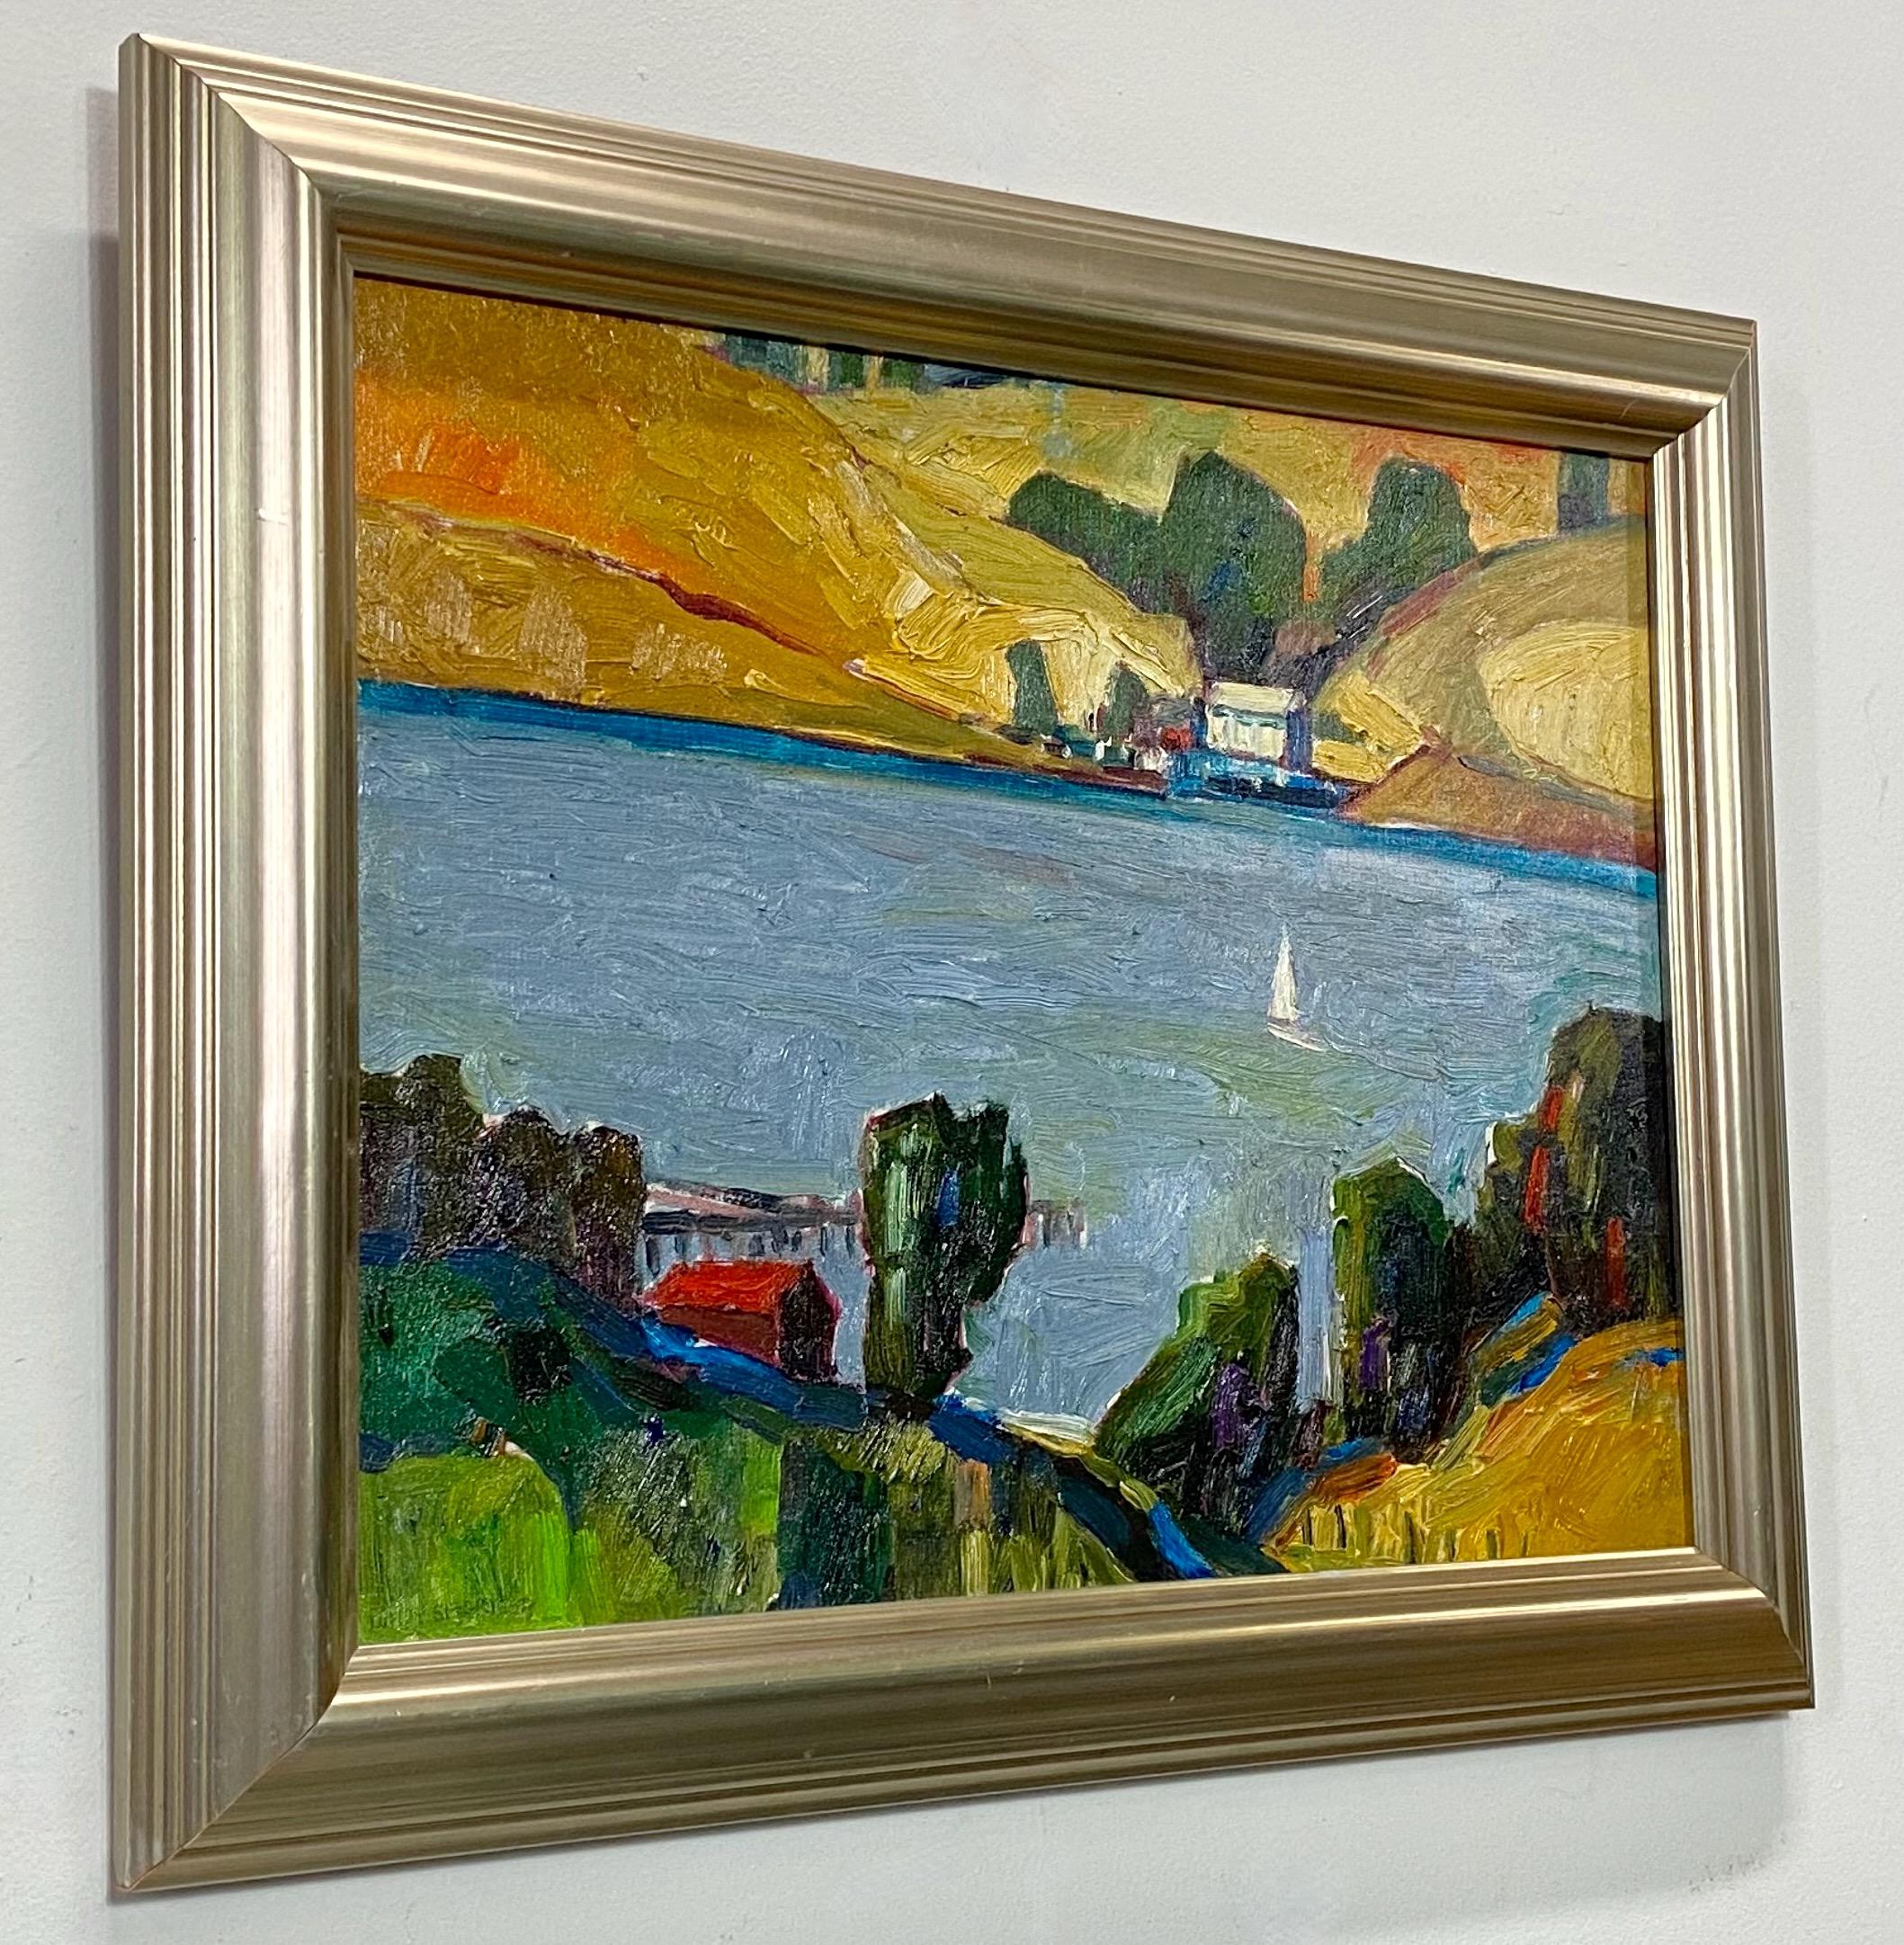 Expressionist San Francisco Bay Area Coastal Landscape Painting by Lundy Siegriest, 1977